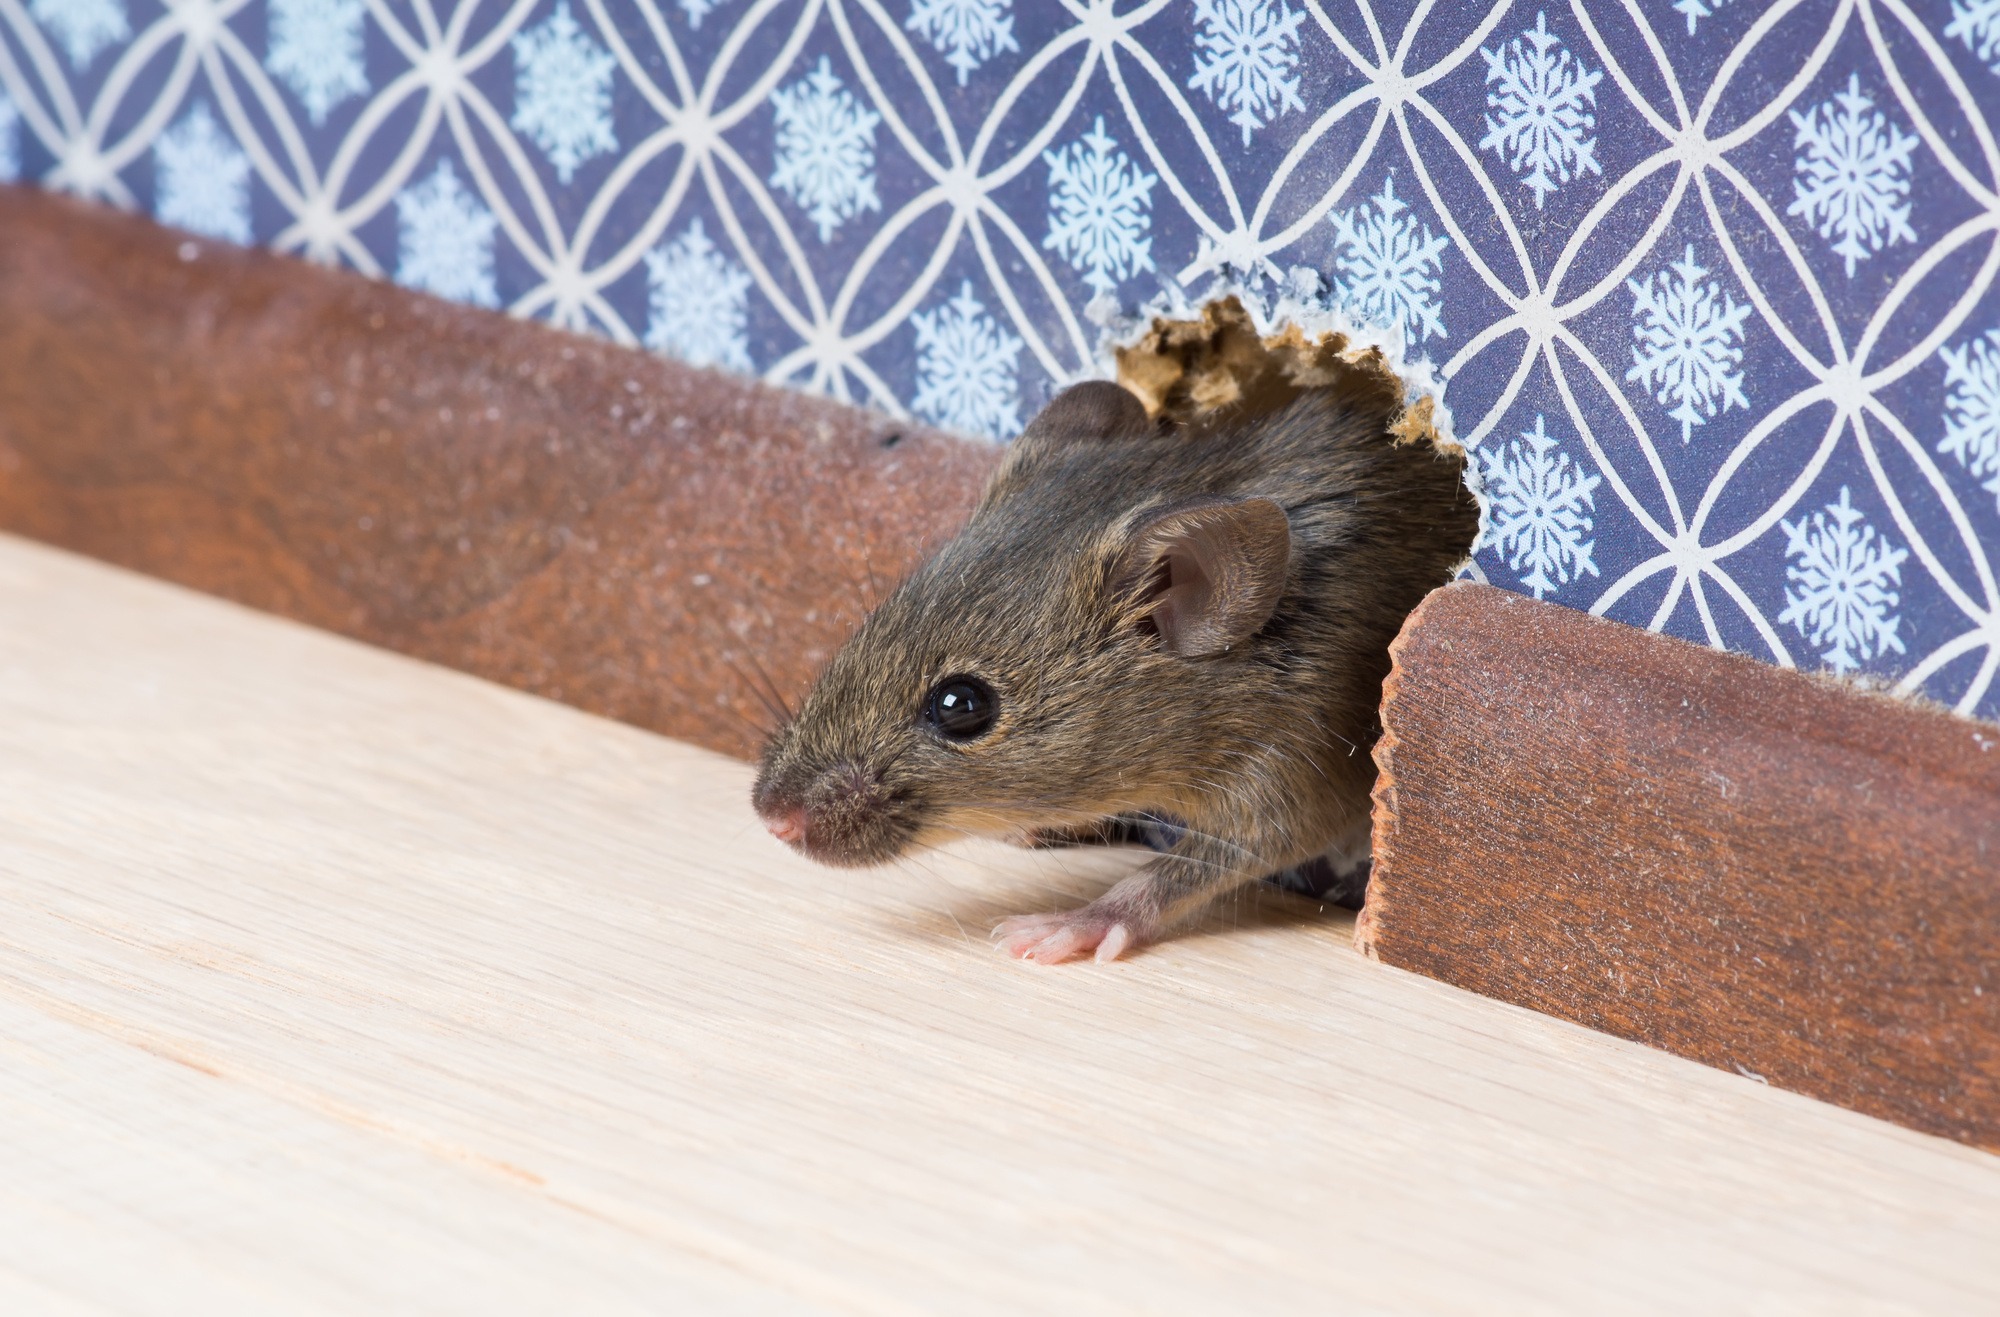 https://planetfriendlypestcontrol.com/wp-content/uploads/2020/08/Common-house-mouse-looks-out.jpg